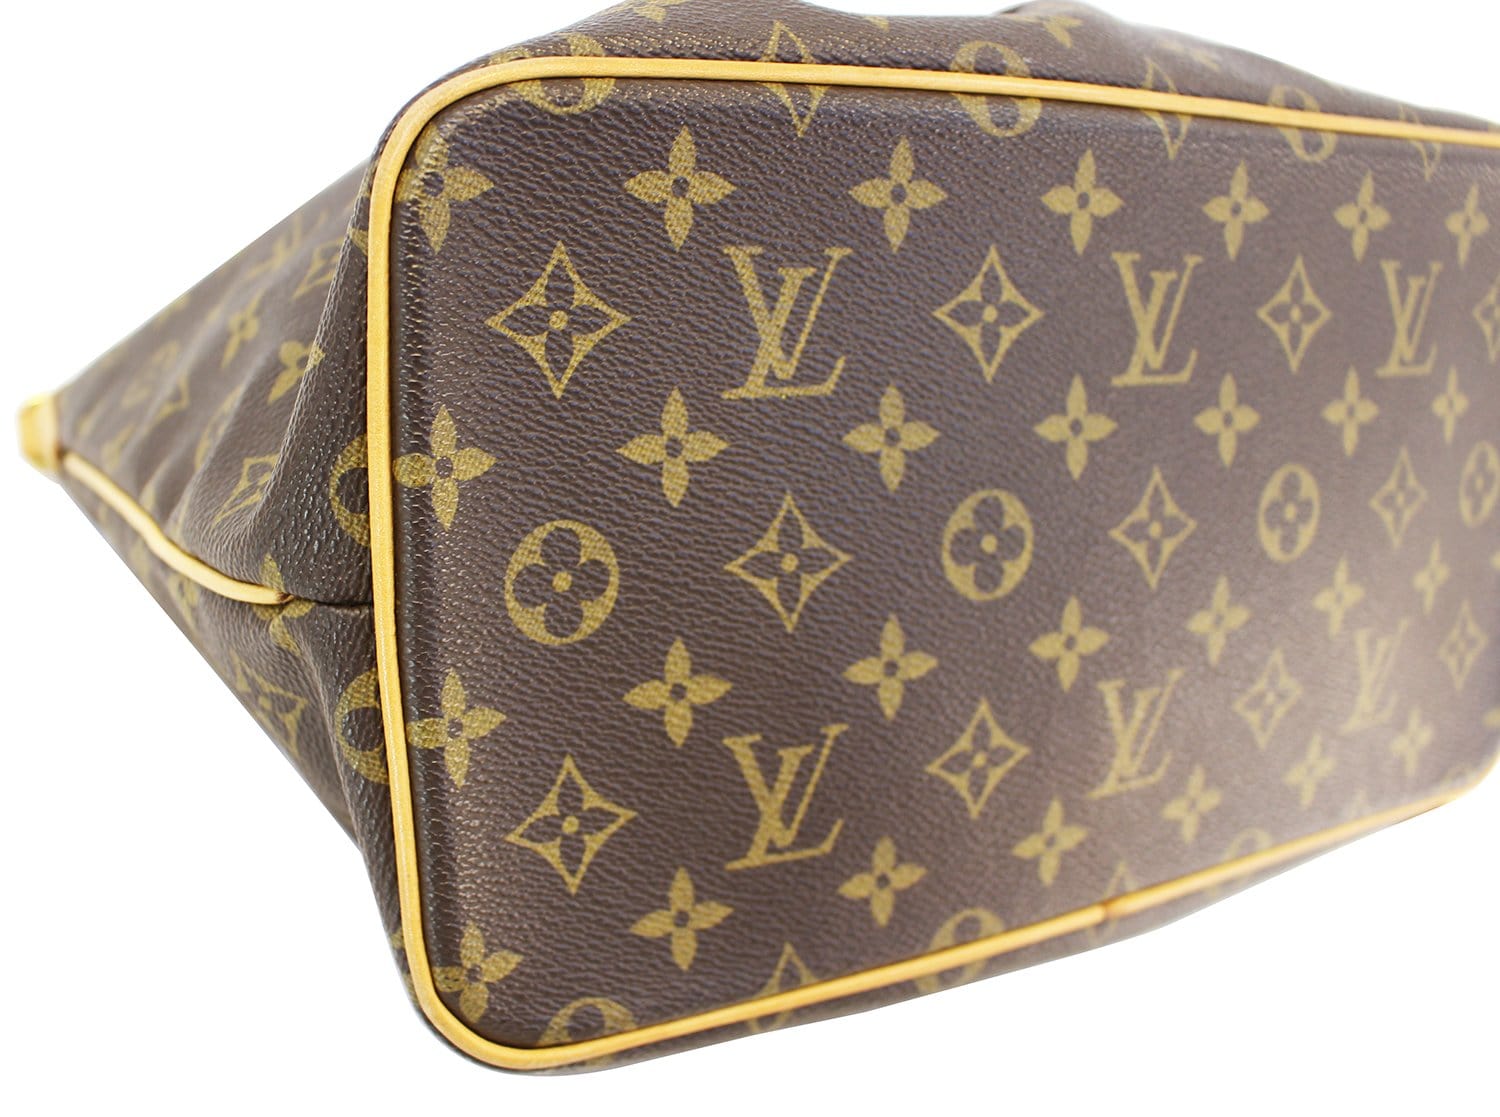 Louis Vuitton Palermo PM In Monogram for Sale in Hollywood, FL